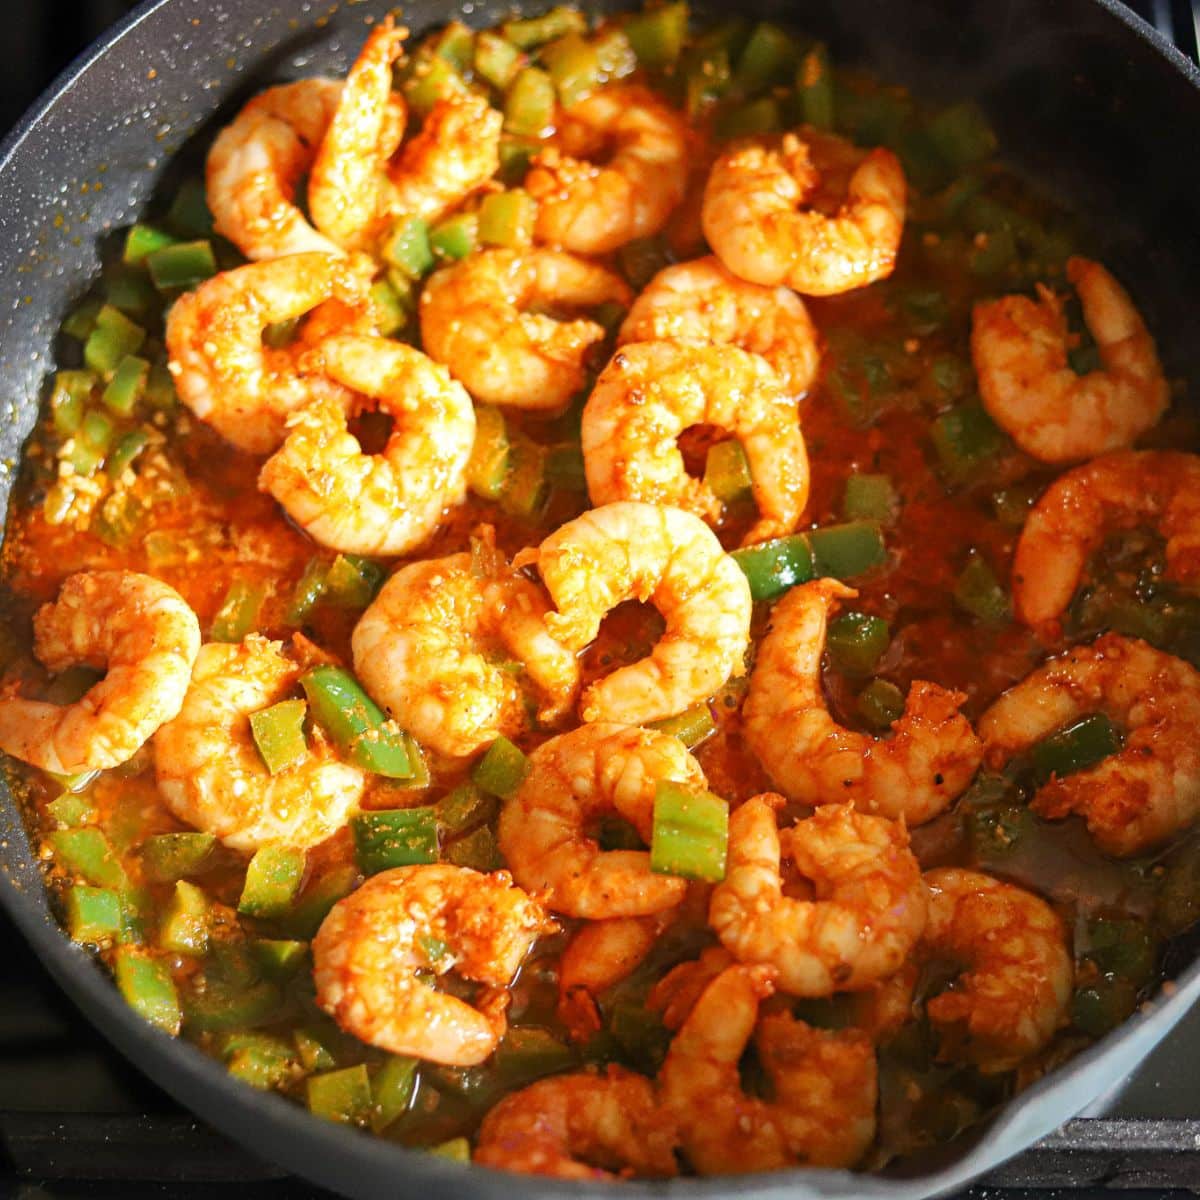 shrimp and green peppers cooking together in a skillet.